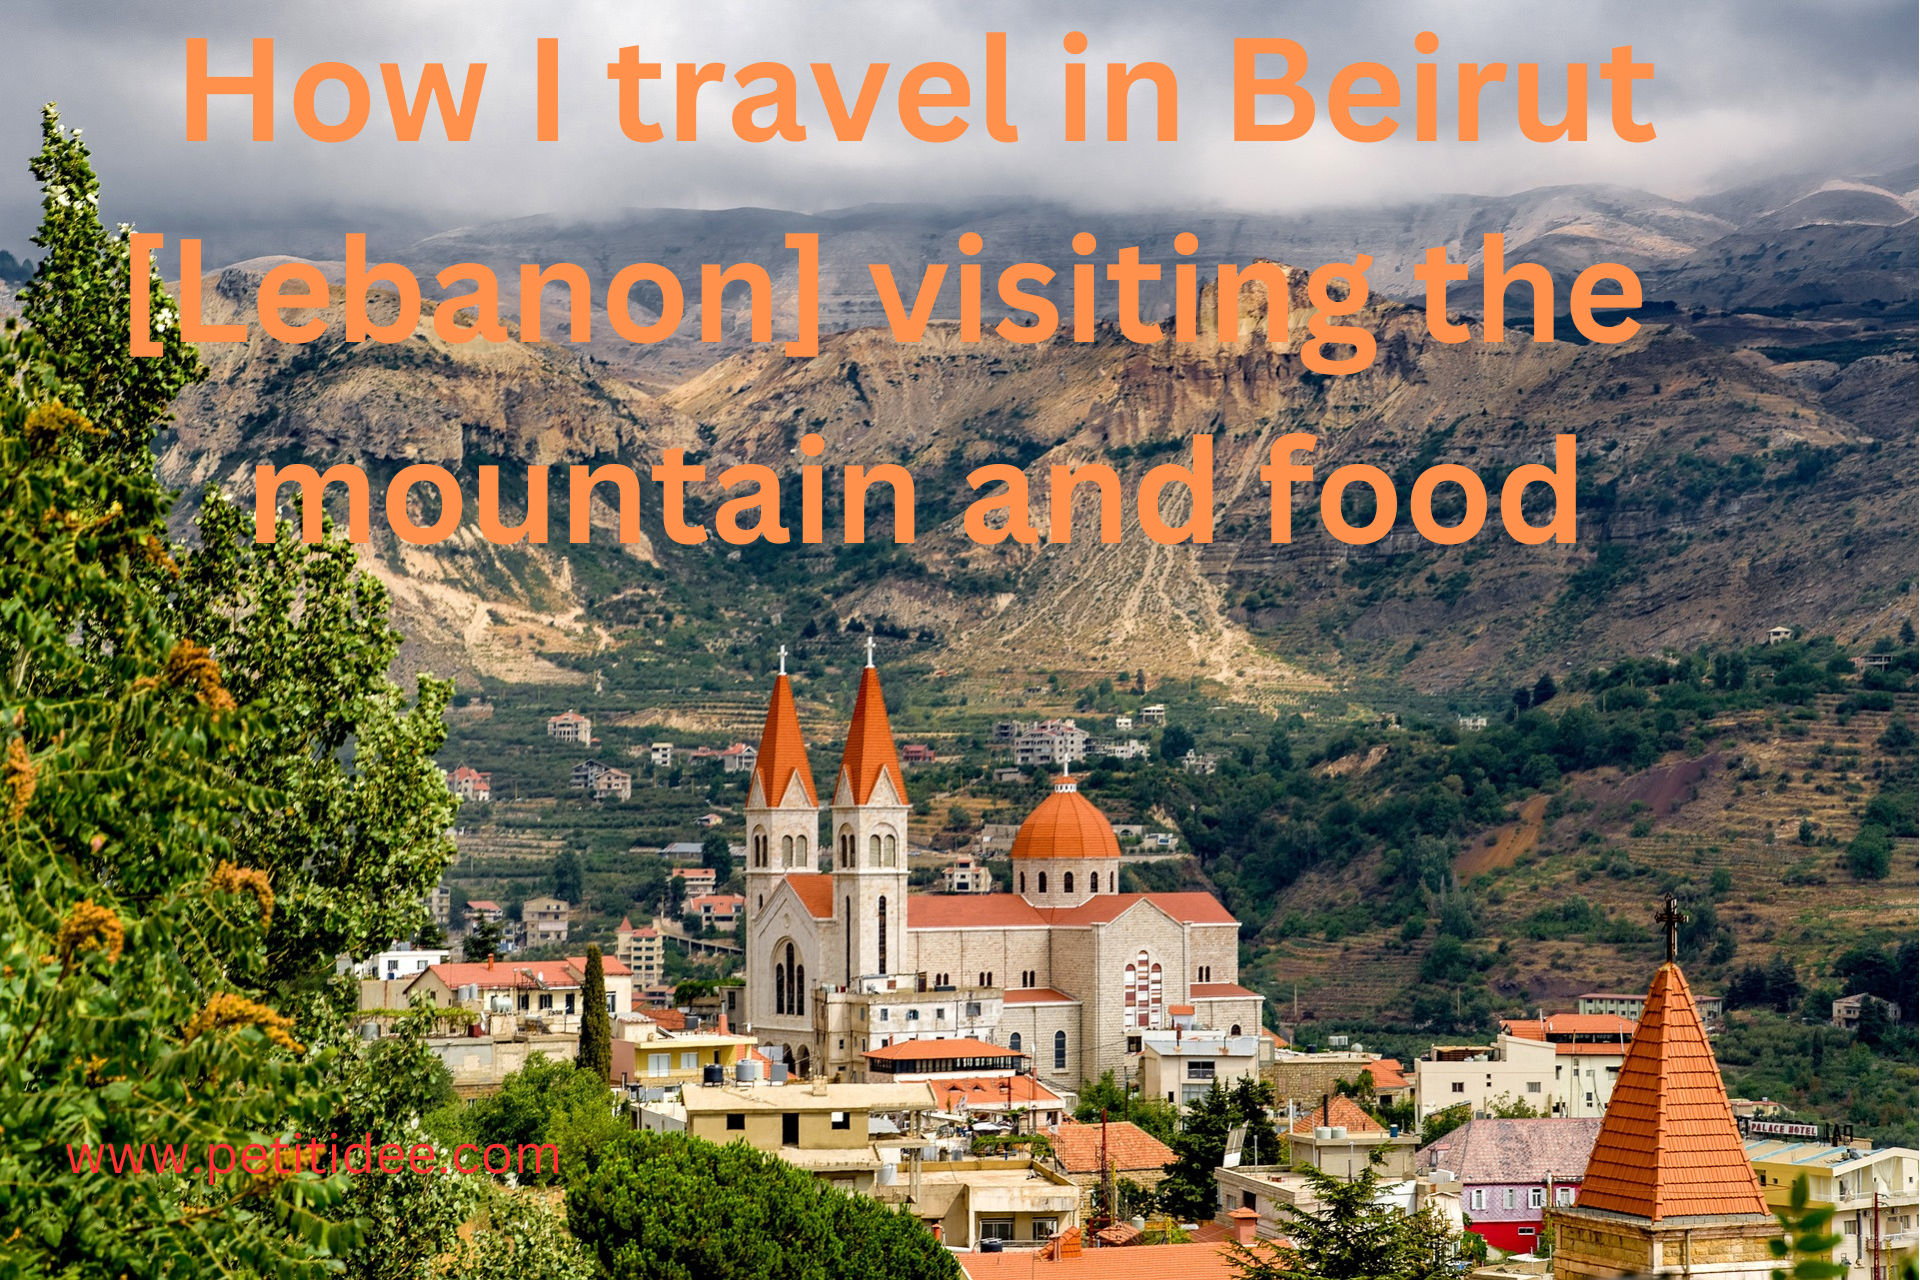 How I travel in Beirut [Lebanon] visiting the mountain and food